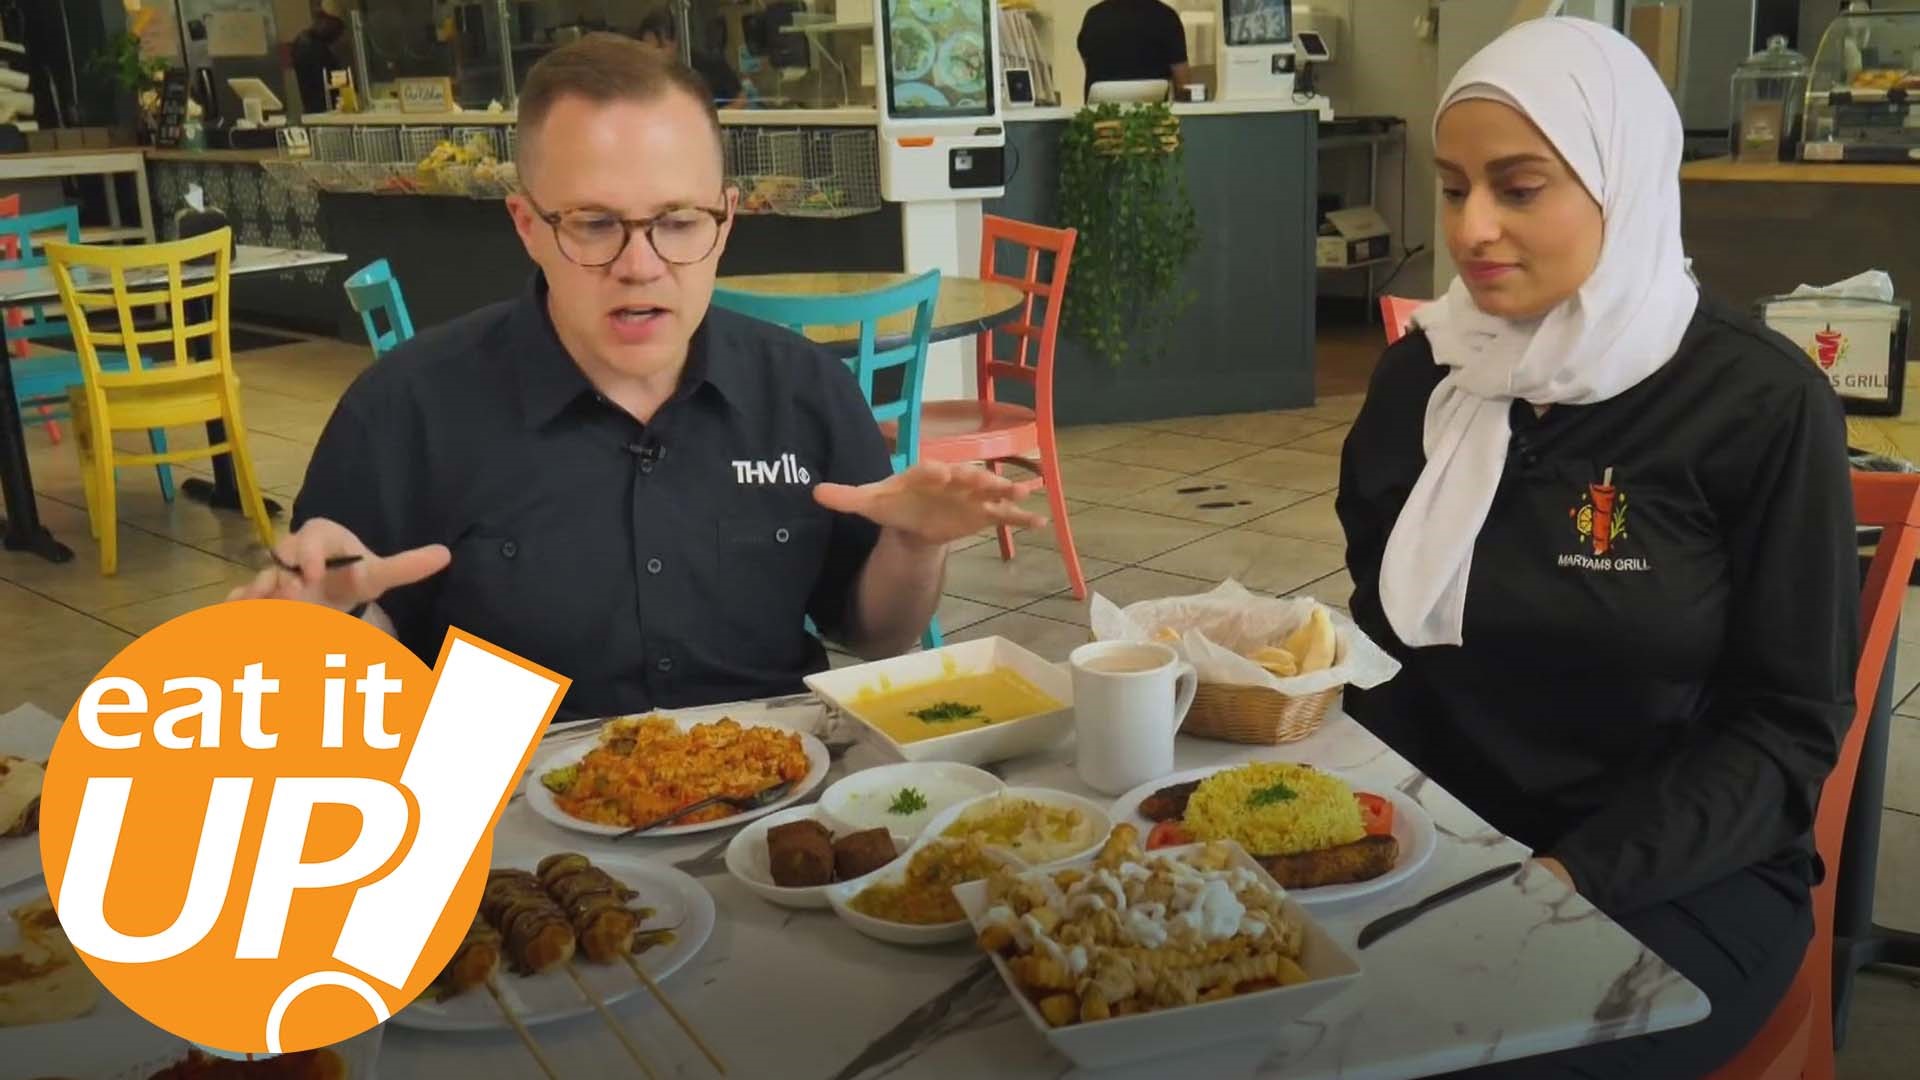 On this week's Eat It Up, Skot Covert visits Maryam's Grill, an authentic Mediterranean restaurant connecting people through food and culture in downtown Little Rock